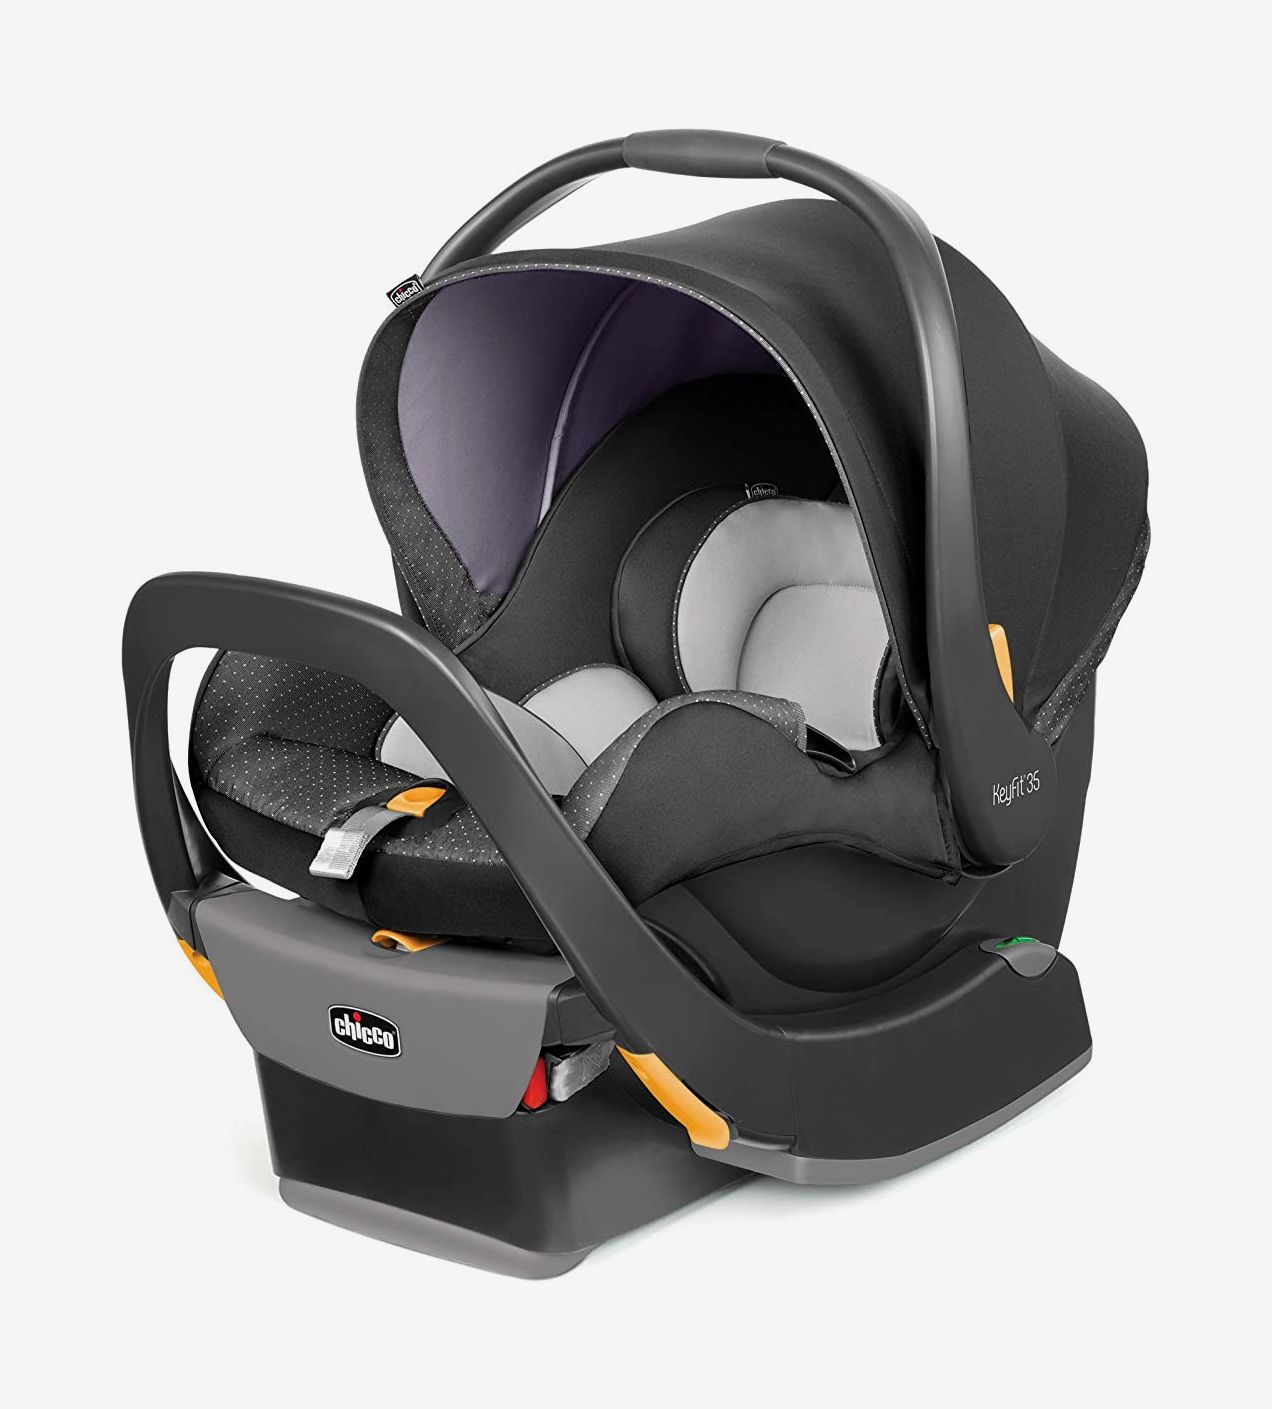 25 Best Infant Car Seats And Booster 2020 The Strategist - Top Car Seats For Toddlers 2020